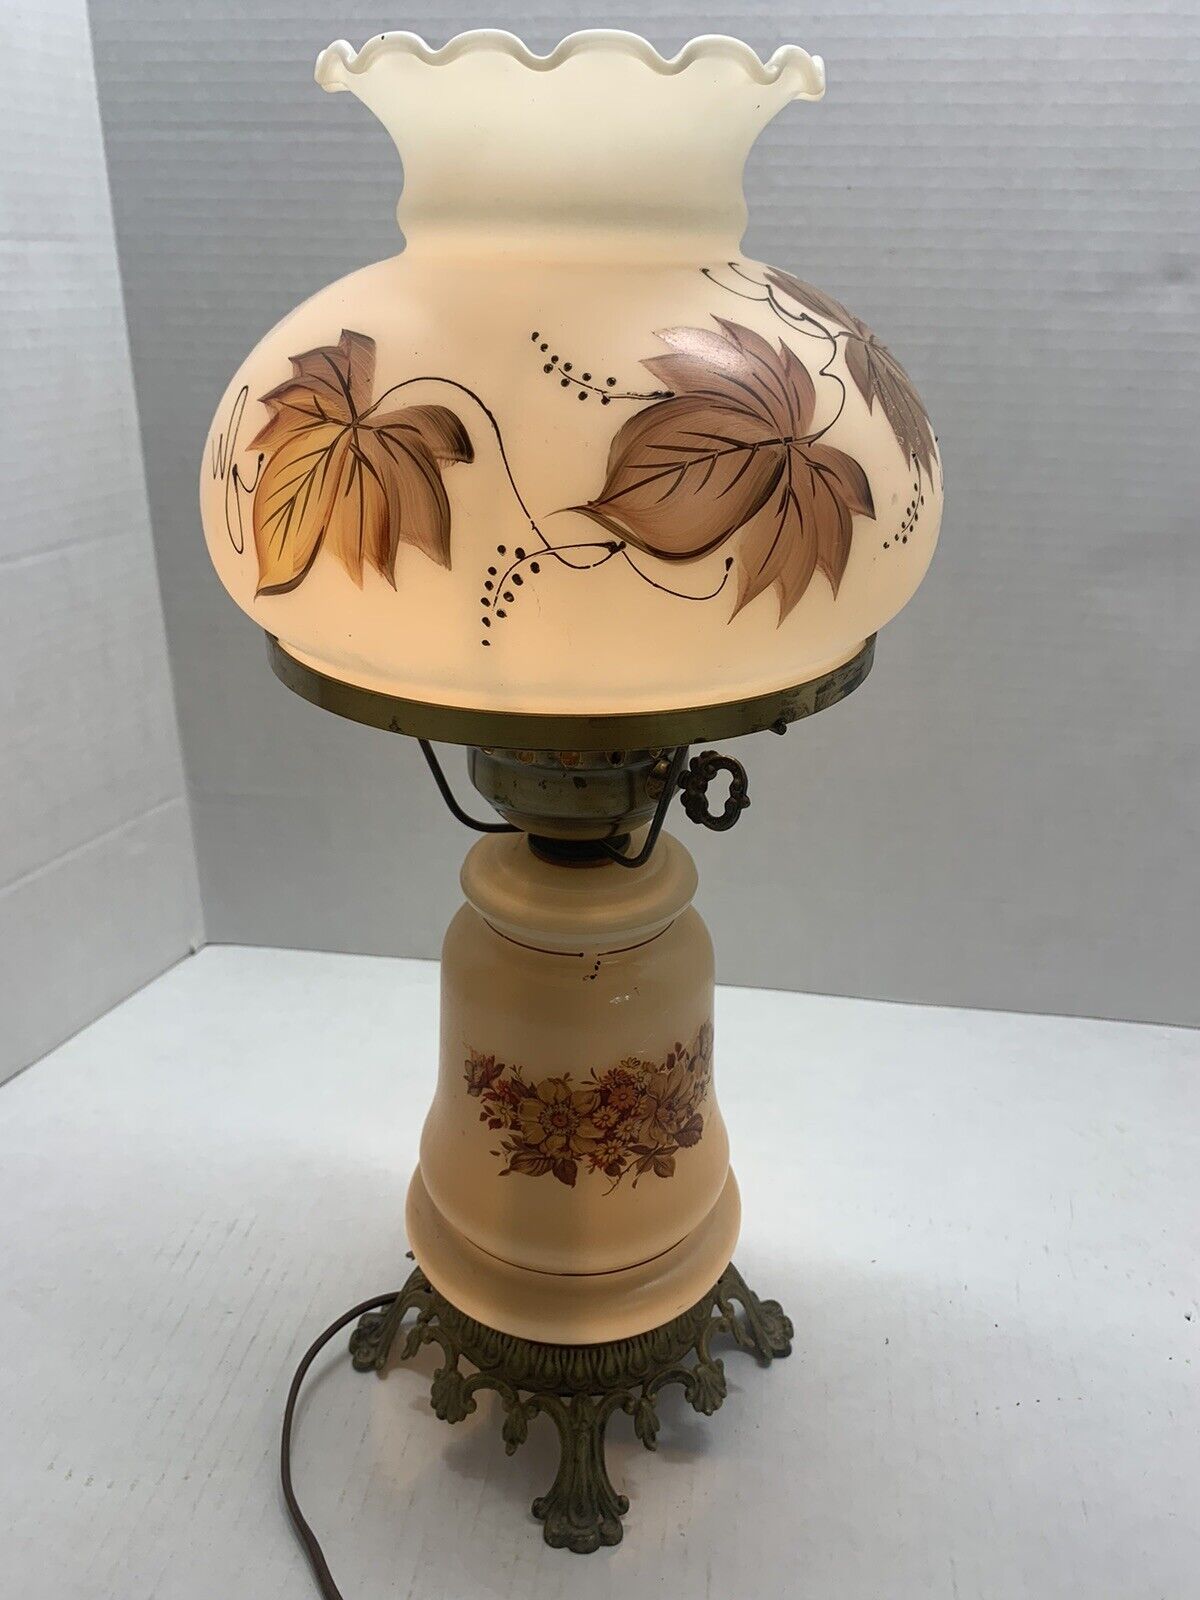 LOOK Vintage Hurricane Lamp 3 Way - Frosted - Hand Painted Floral & Leaves